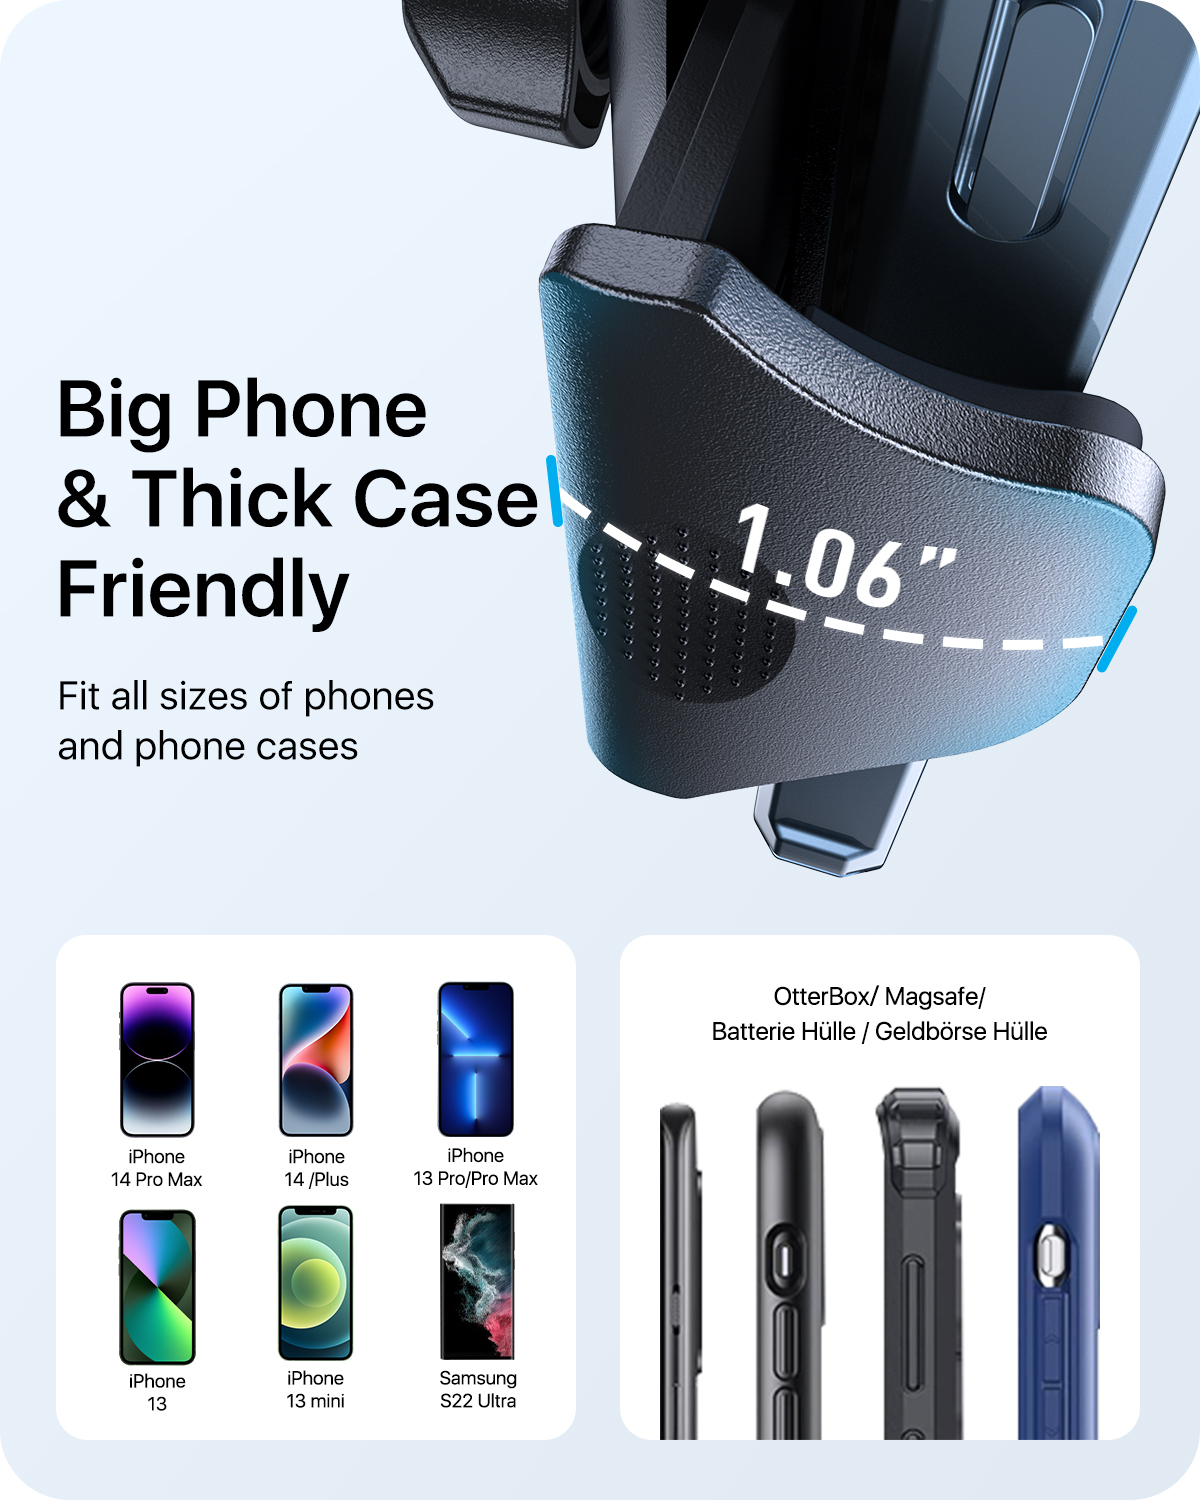 Andobil Cell Phone Holder Car - Free Your Hands, Enjoy Your Life